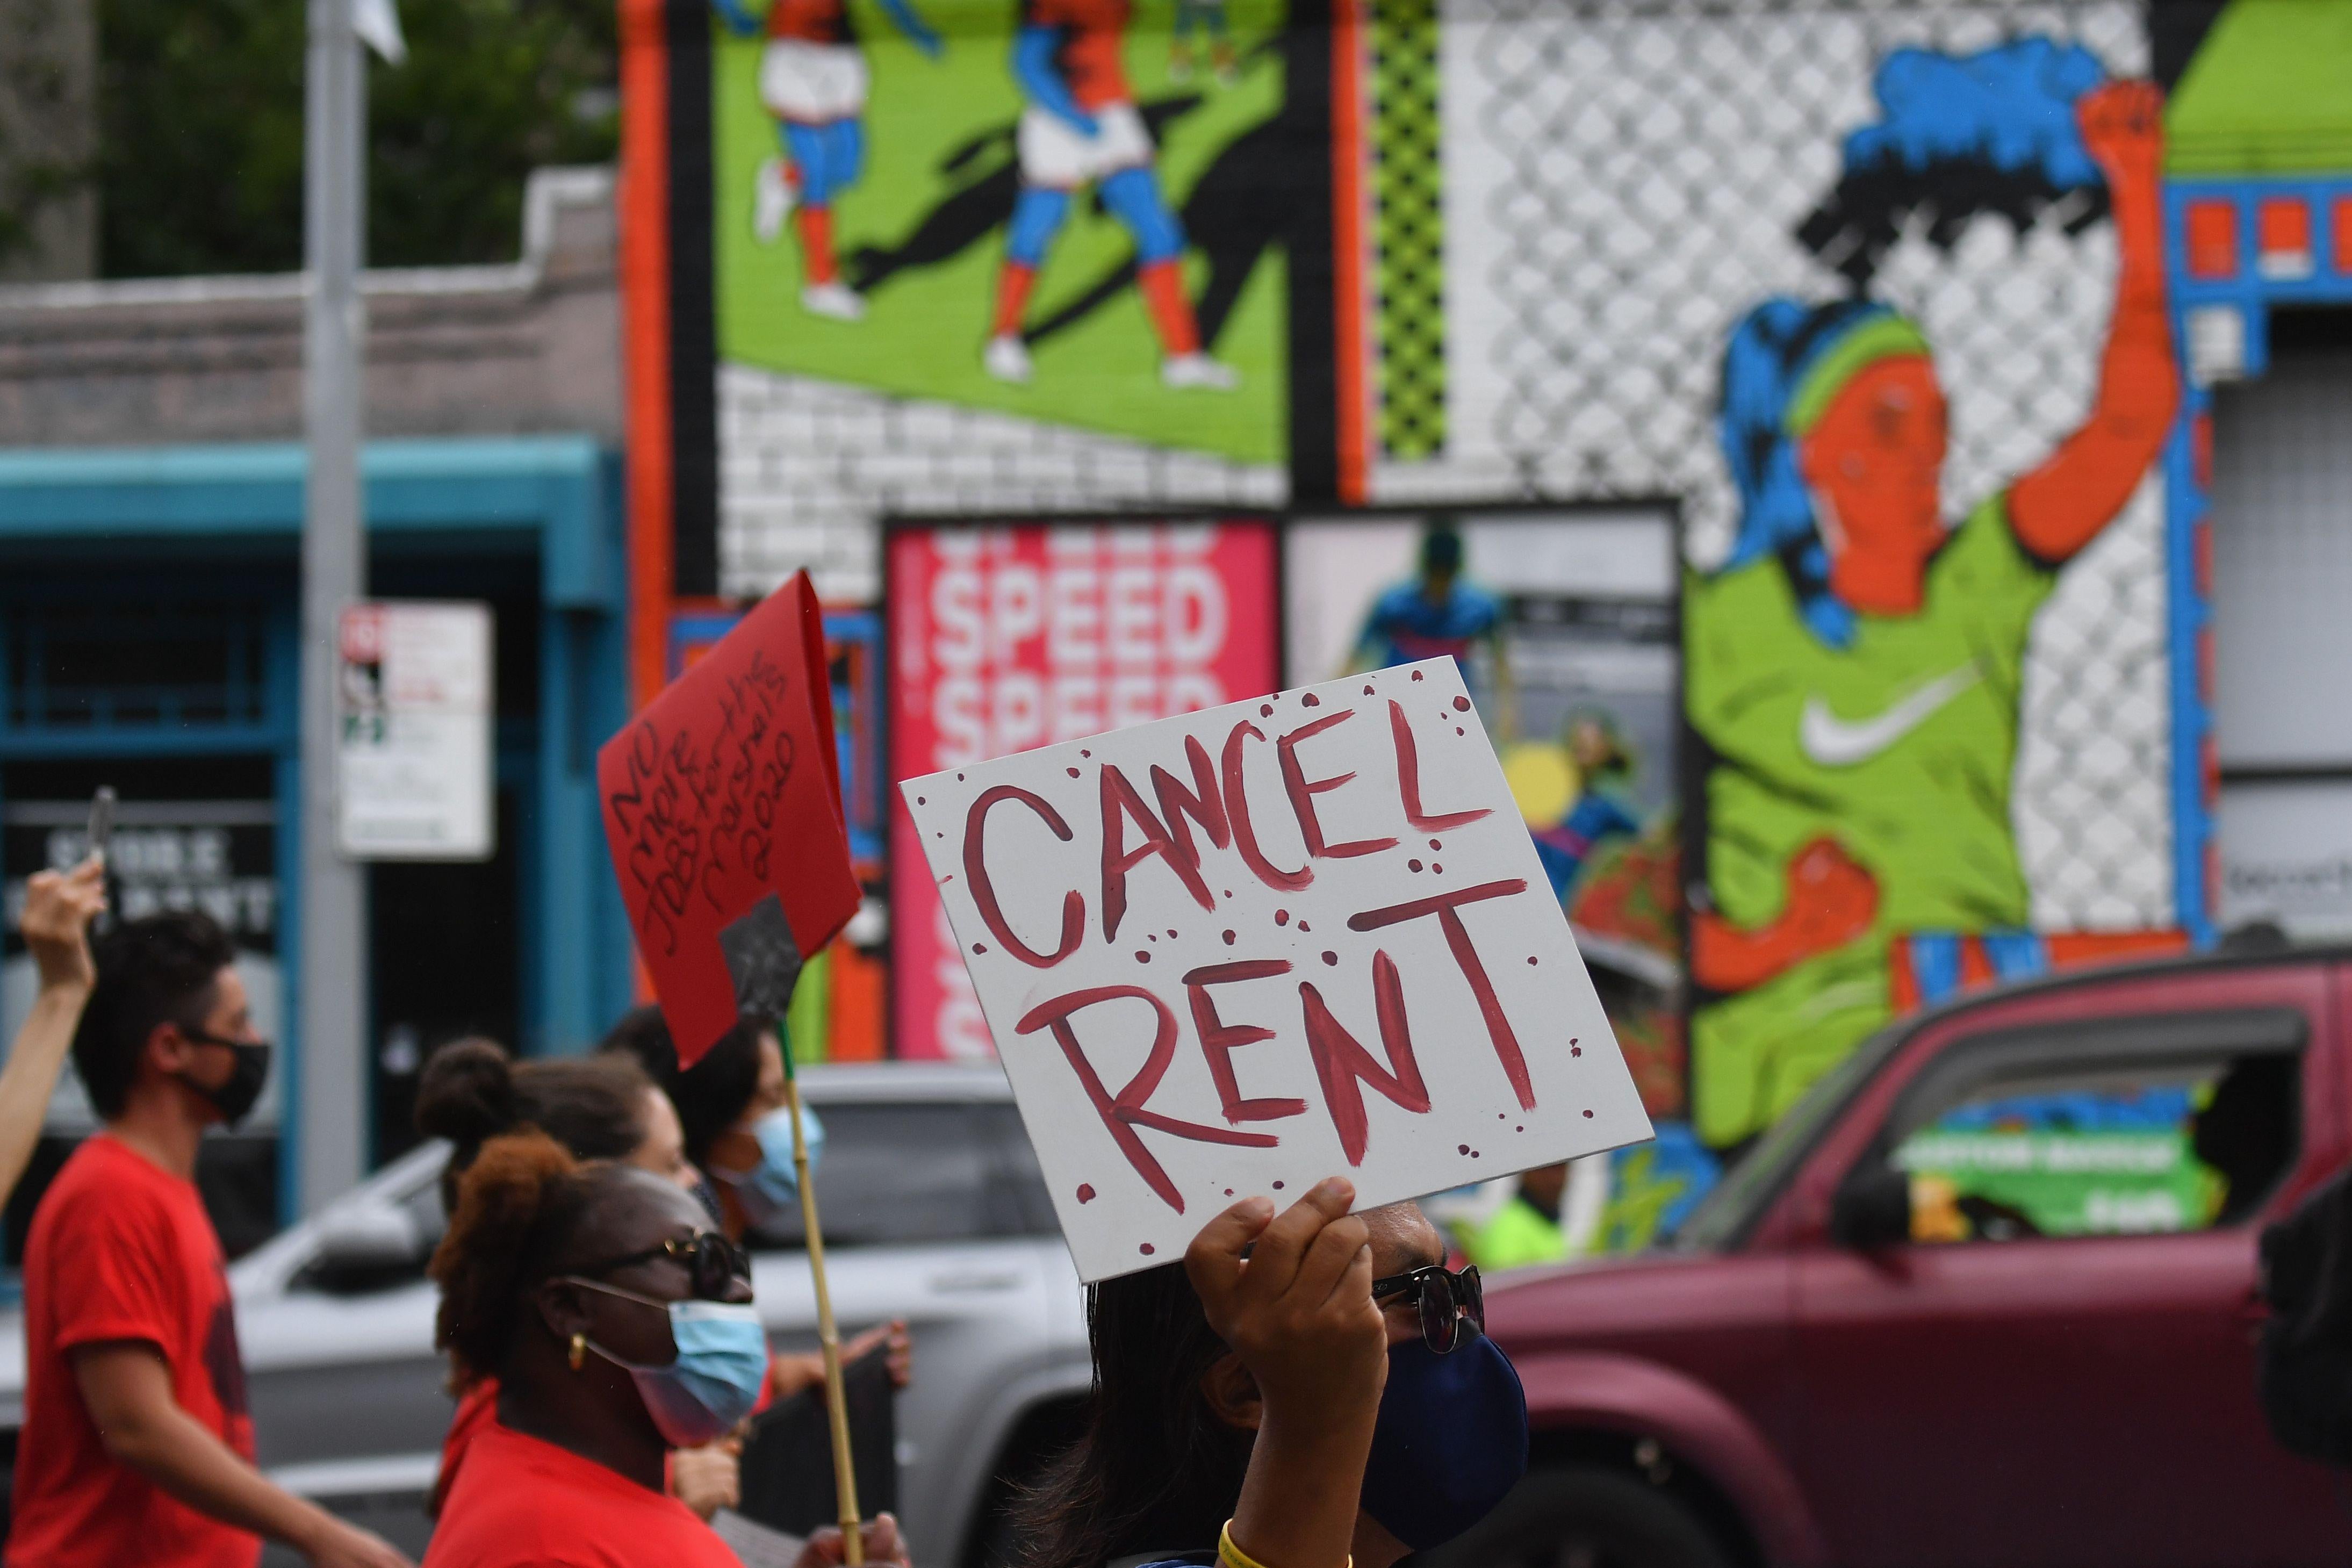 In a protest, a hand holds up a sign saying "Cancel Rent."